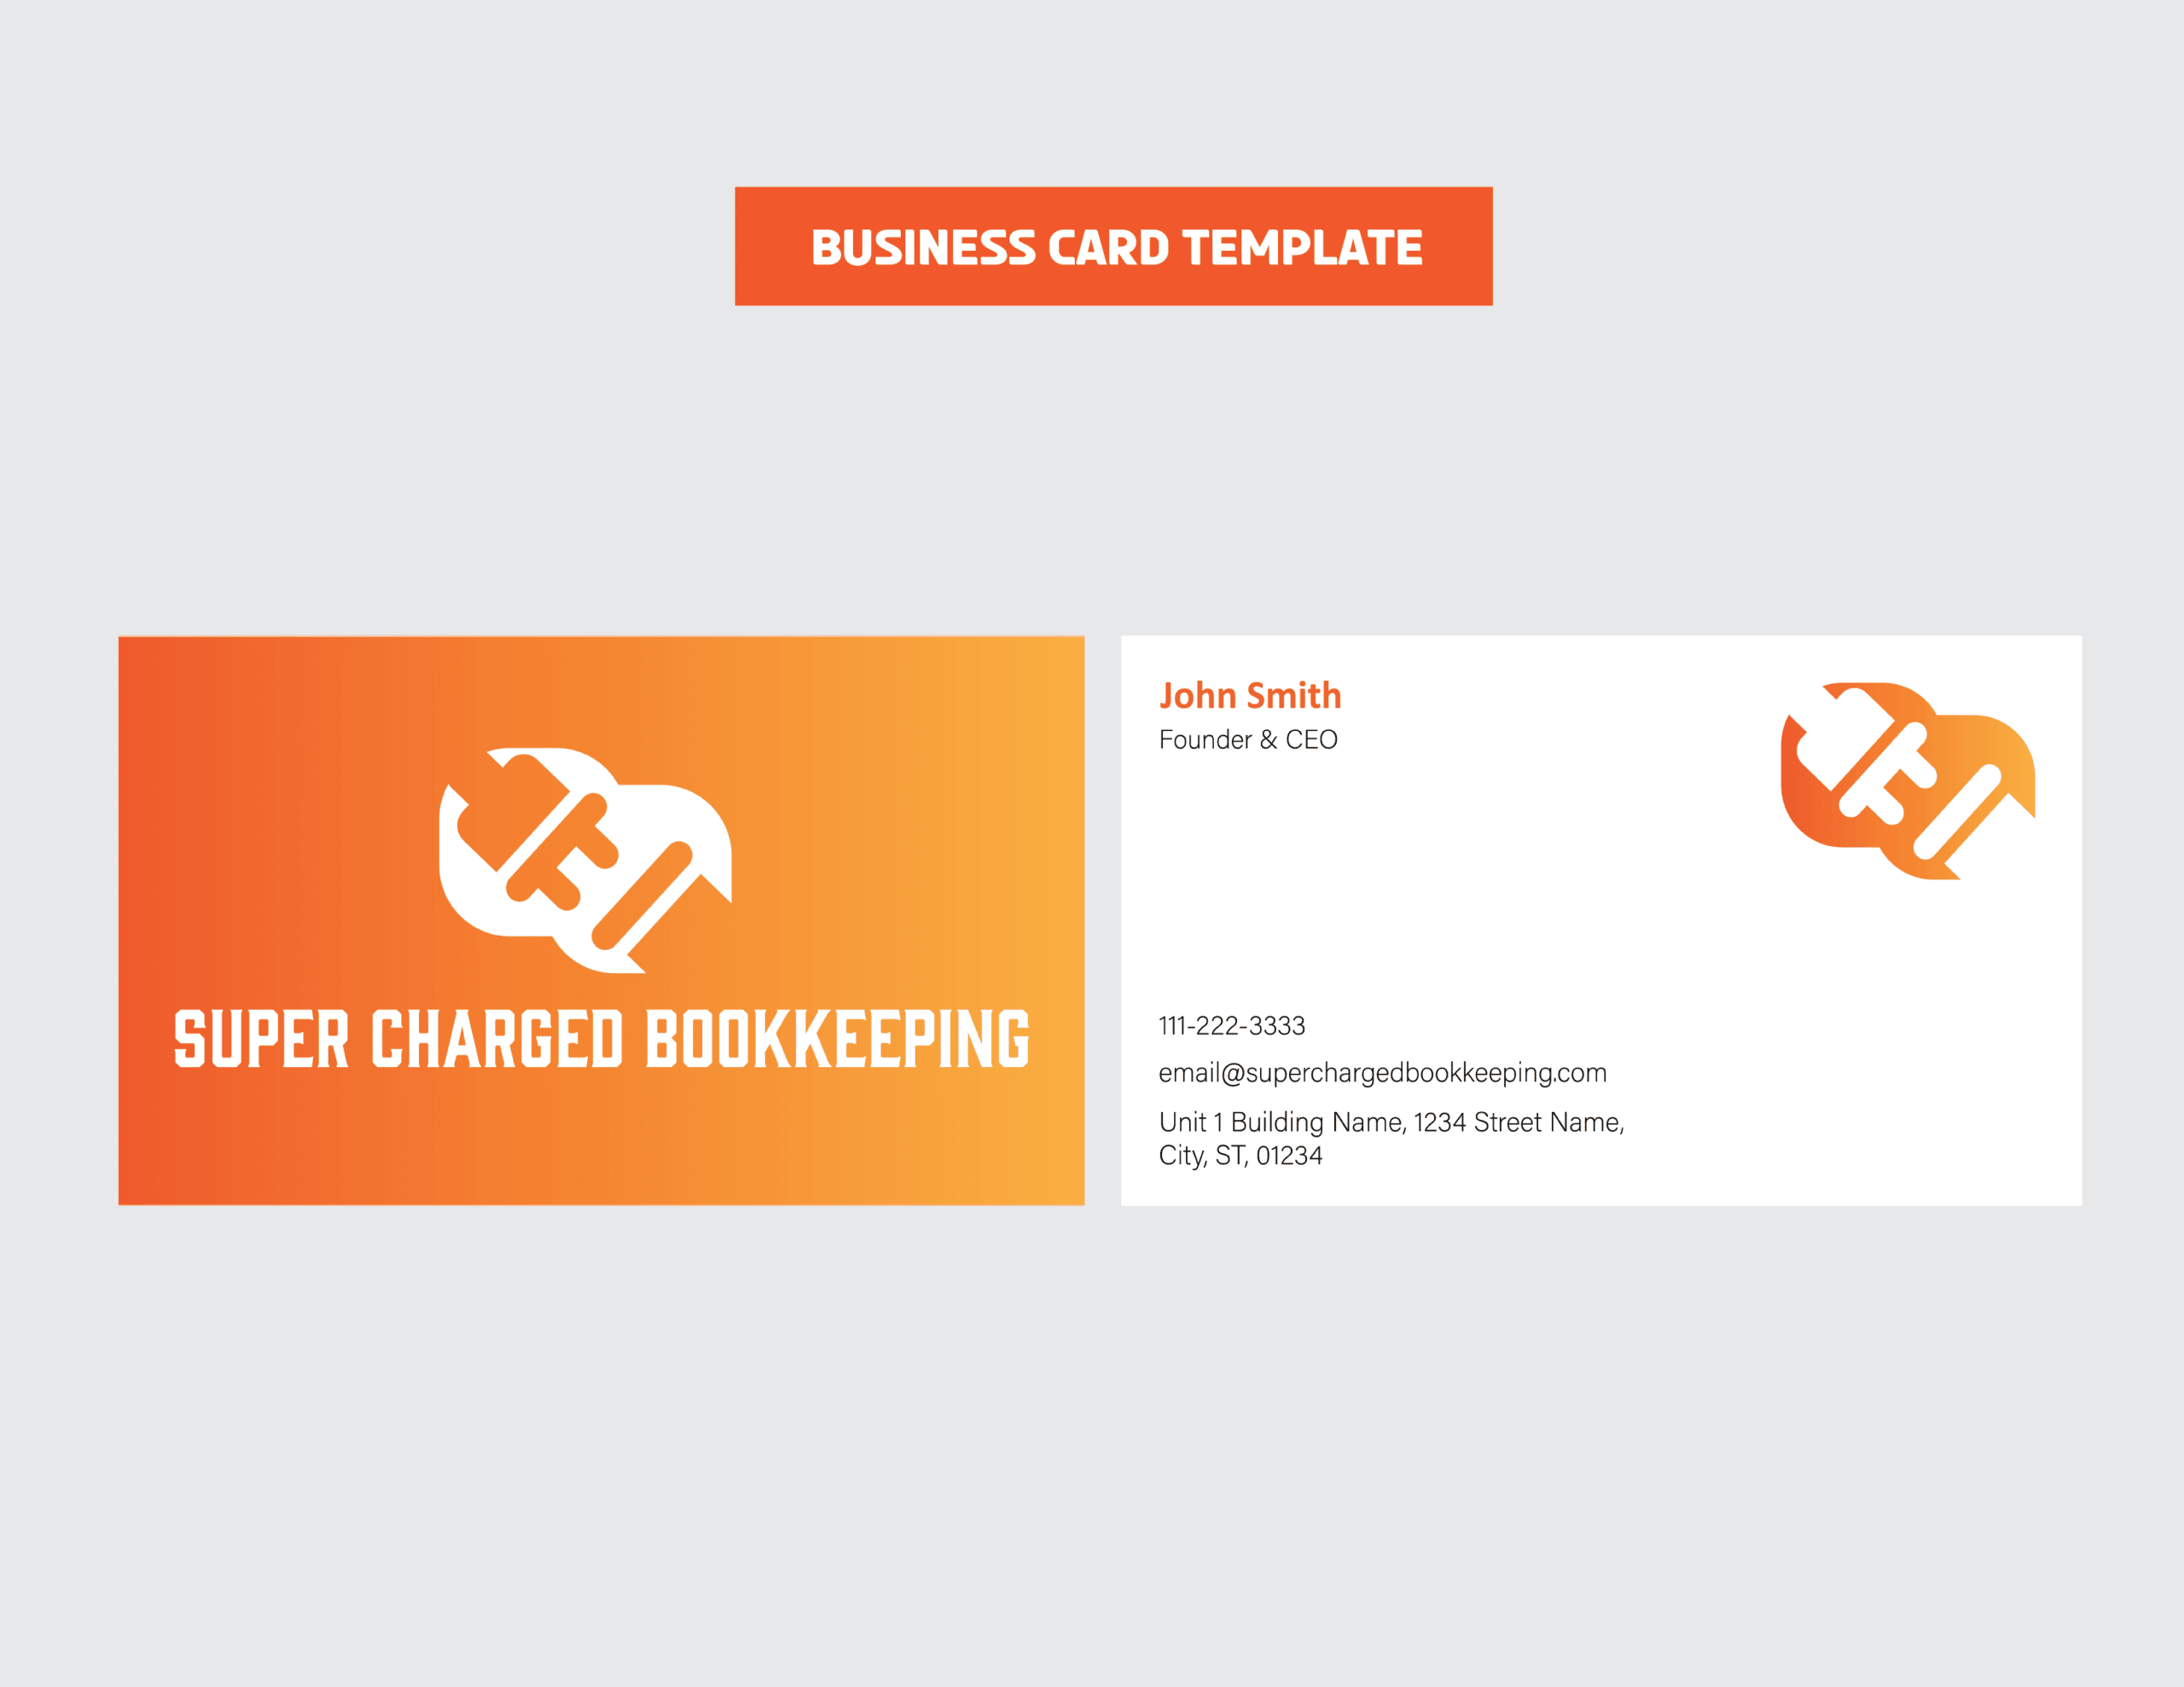 04_SuperChargedBookkeeping_Business Card Template